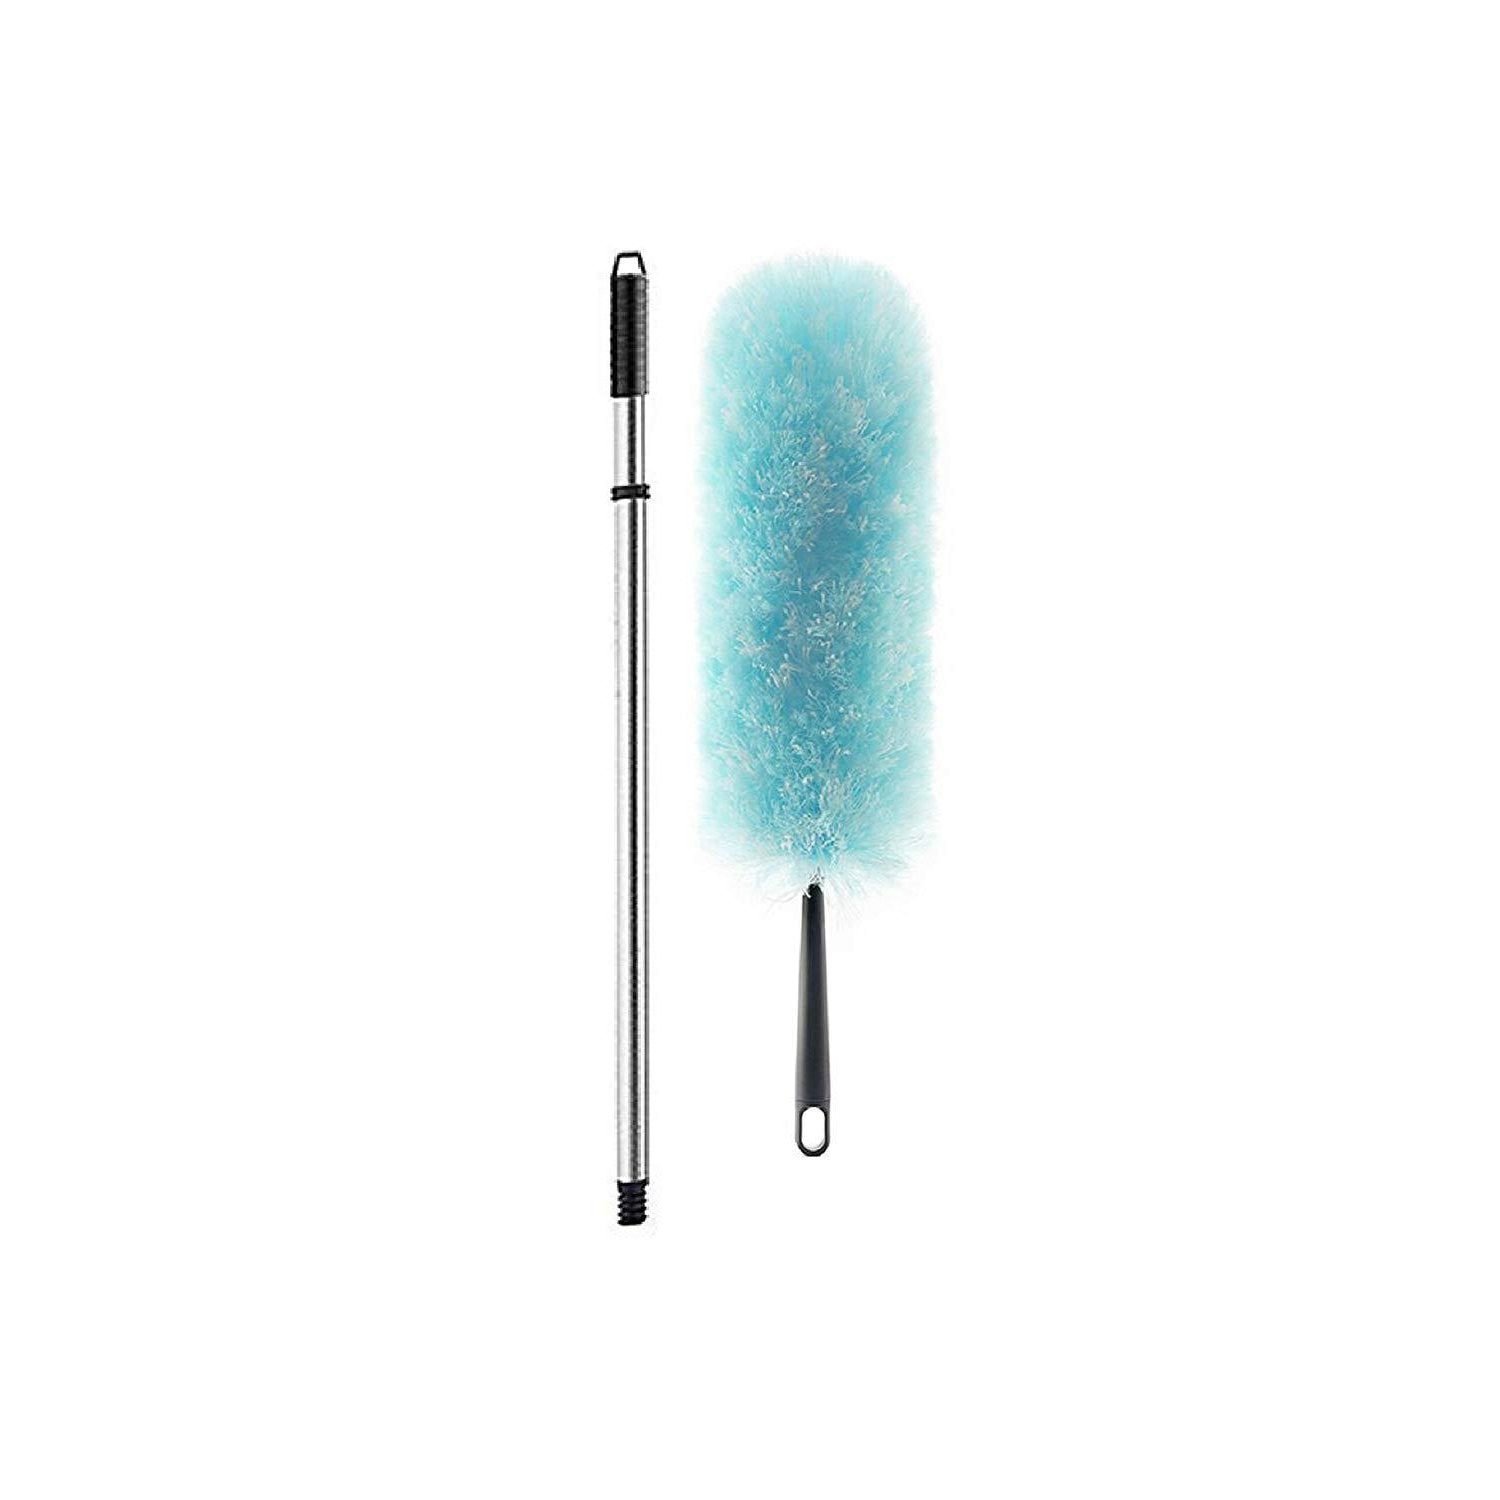 https://fuller.com/cdn/shop/products/large-surface-duster-with-adjustable-handle-duster_1500x1500.jpg?v=1596013906